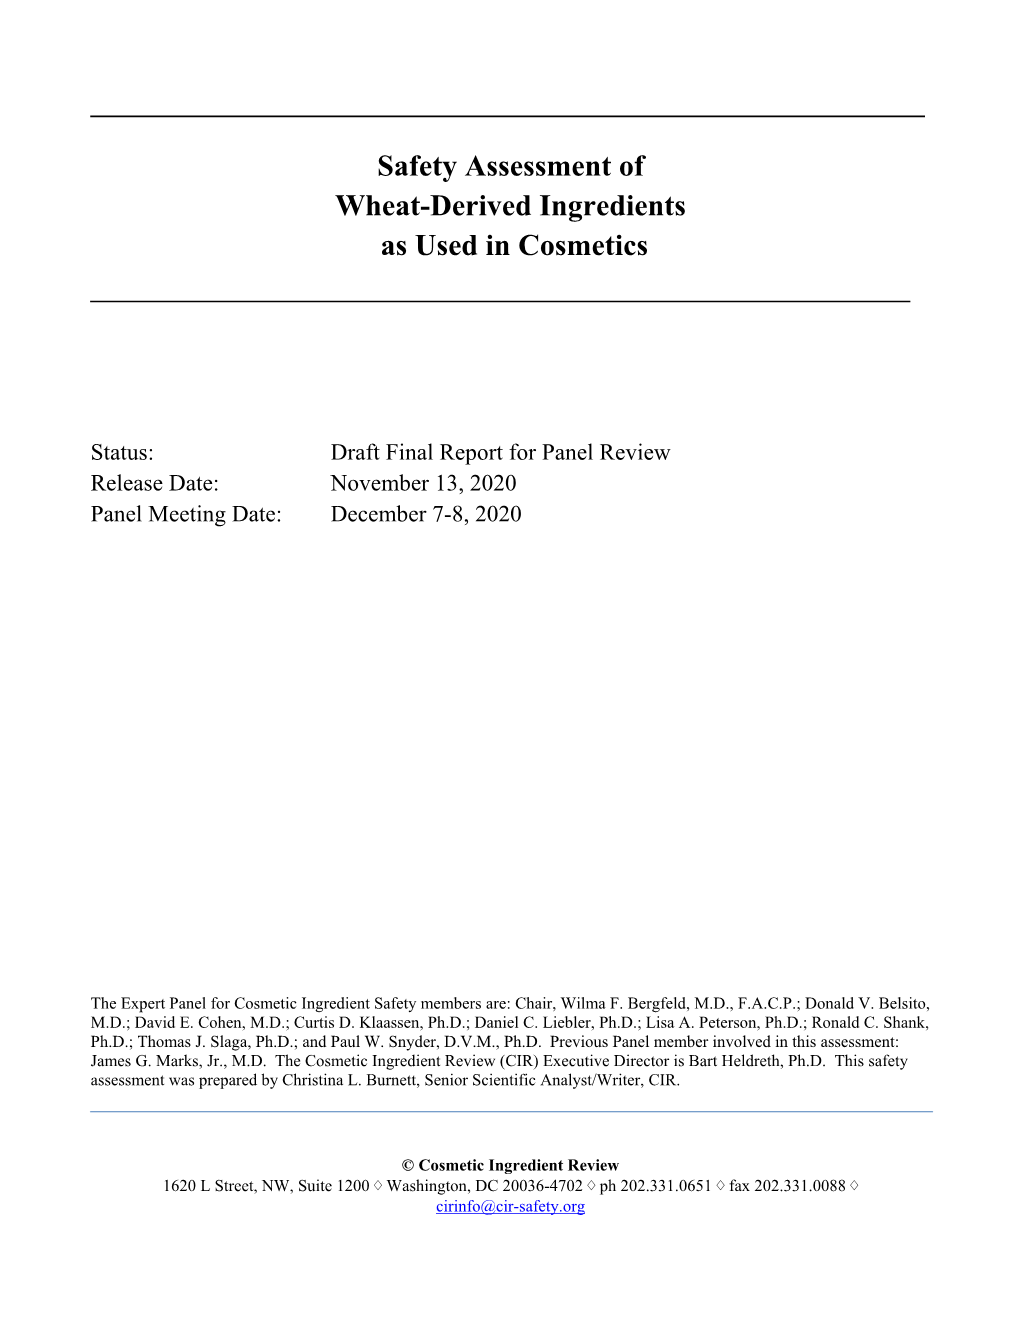 Safety Assessment of Wheat-Derived Ingredients As Used in Cosmetics